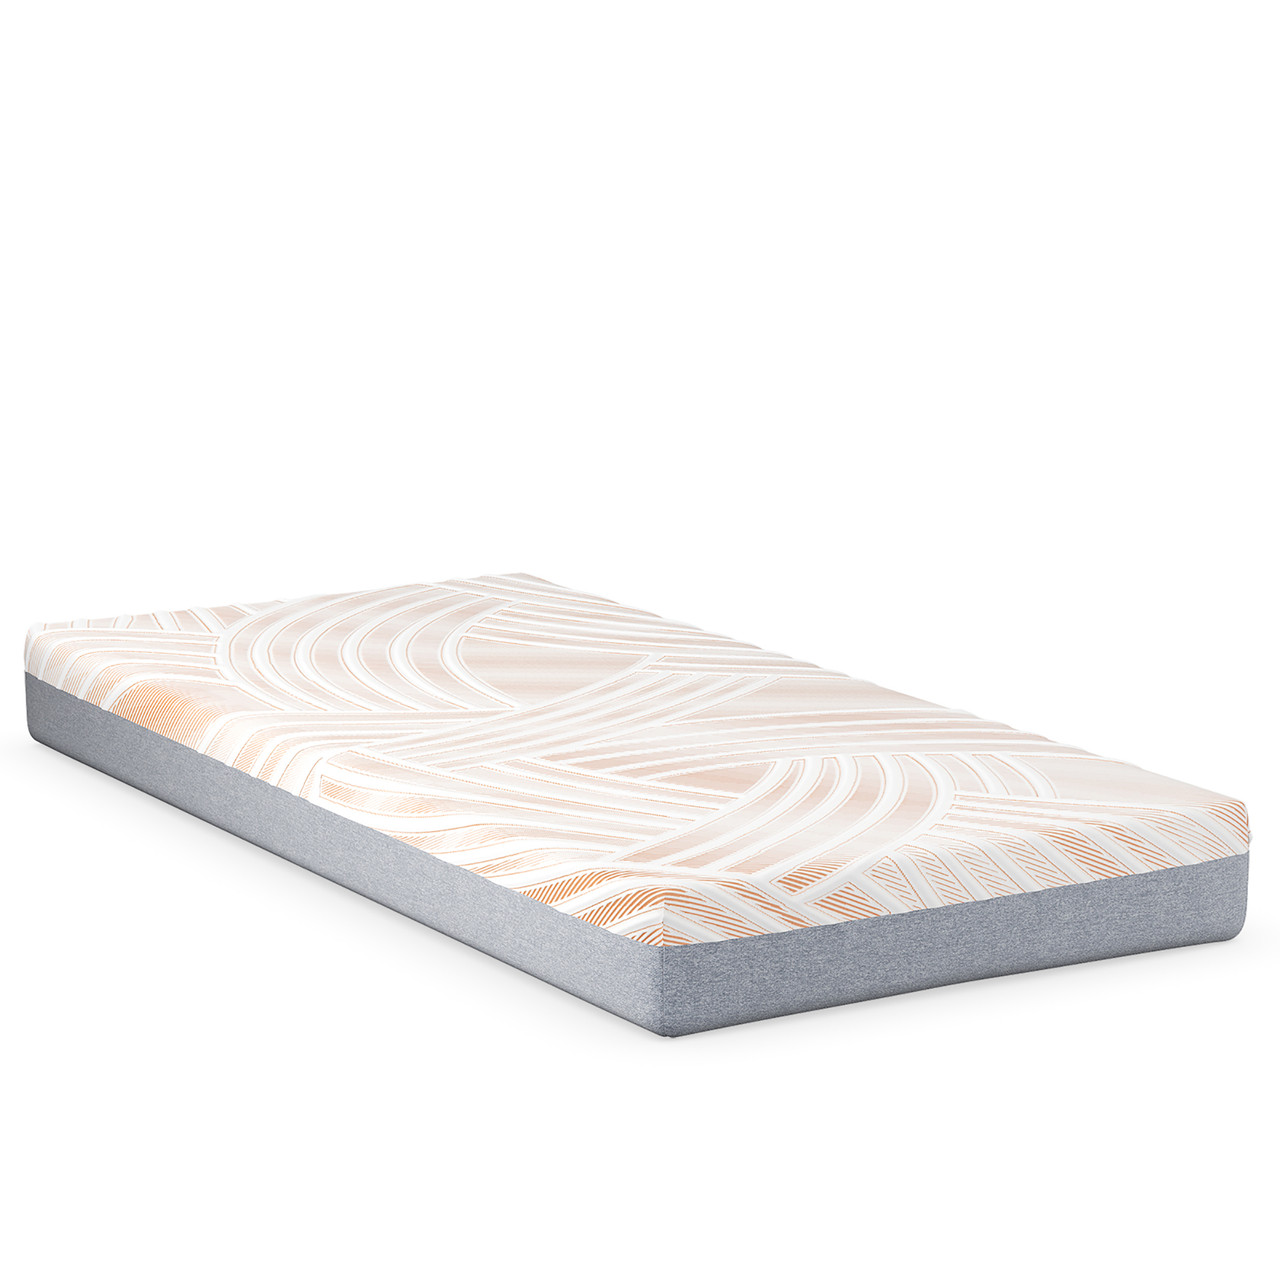 Twin XL Copper Adjustable Mattress with Bamboo Charcoal product image